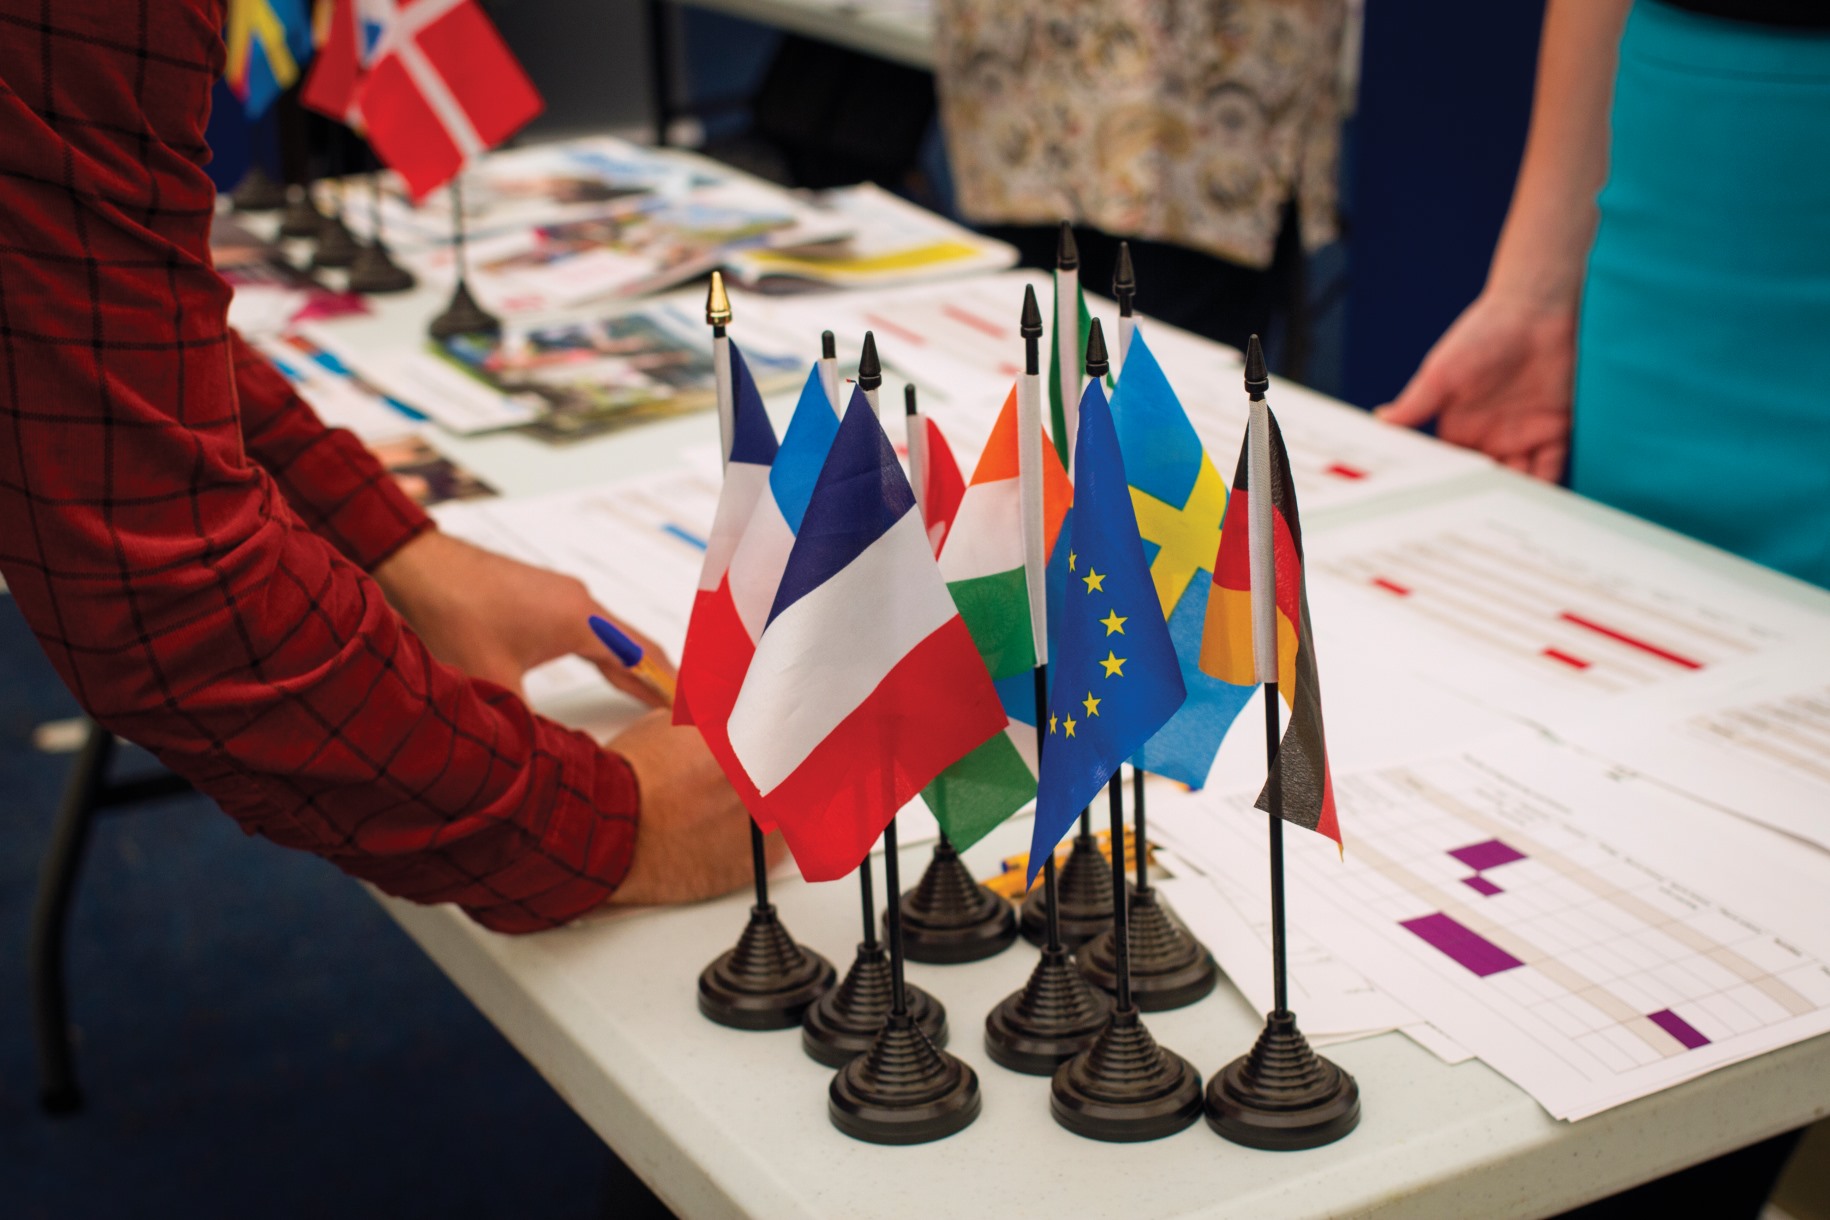 Table covered in the flags of various nations